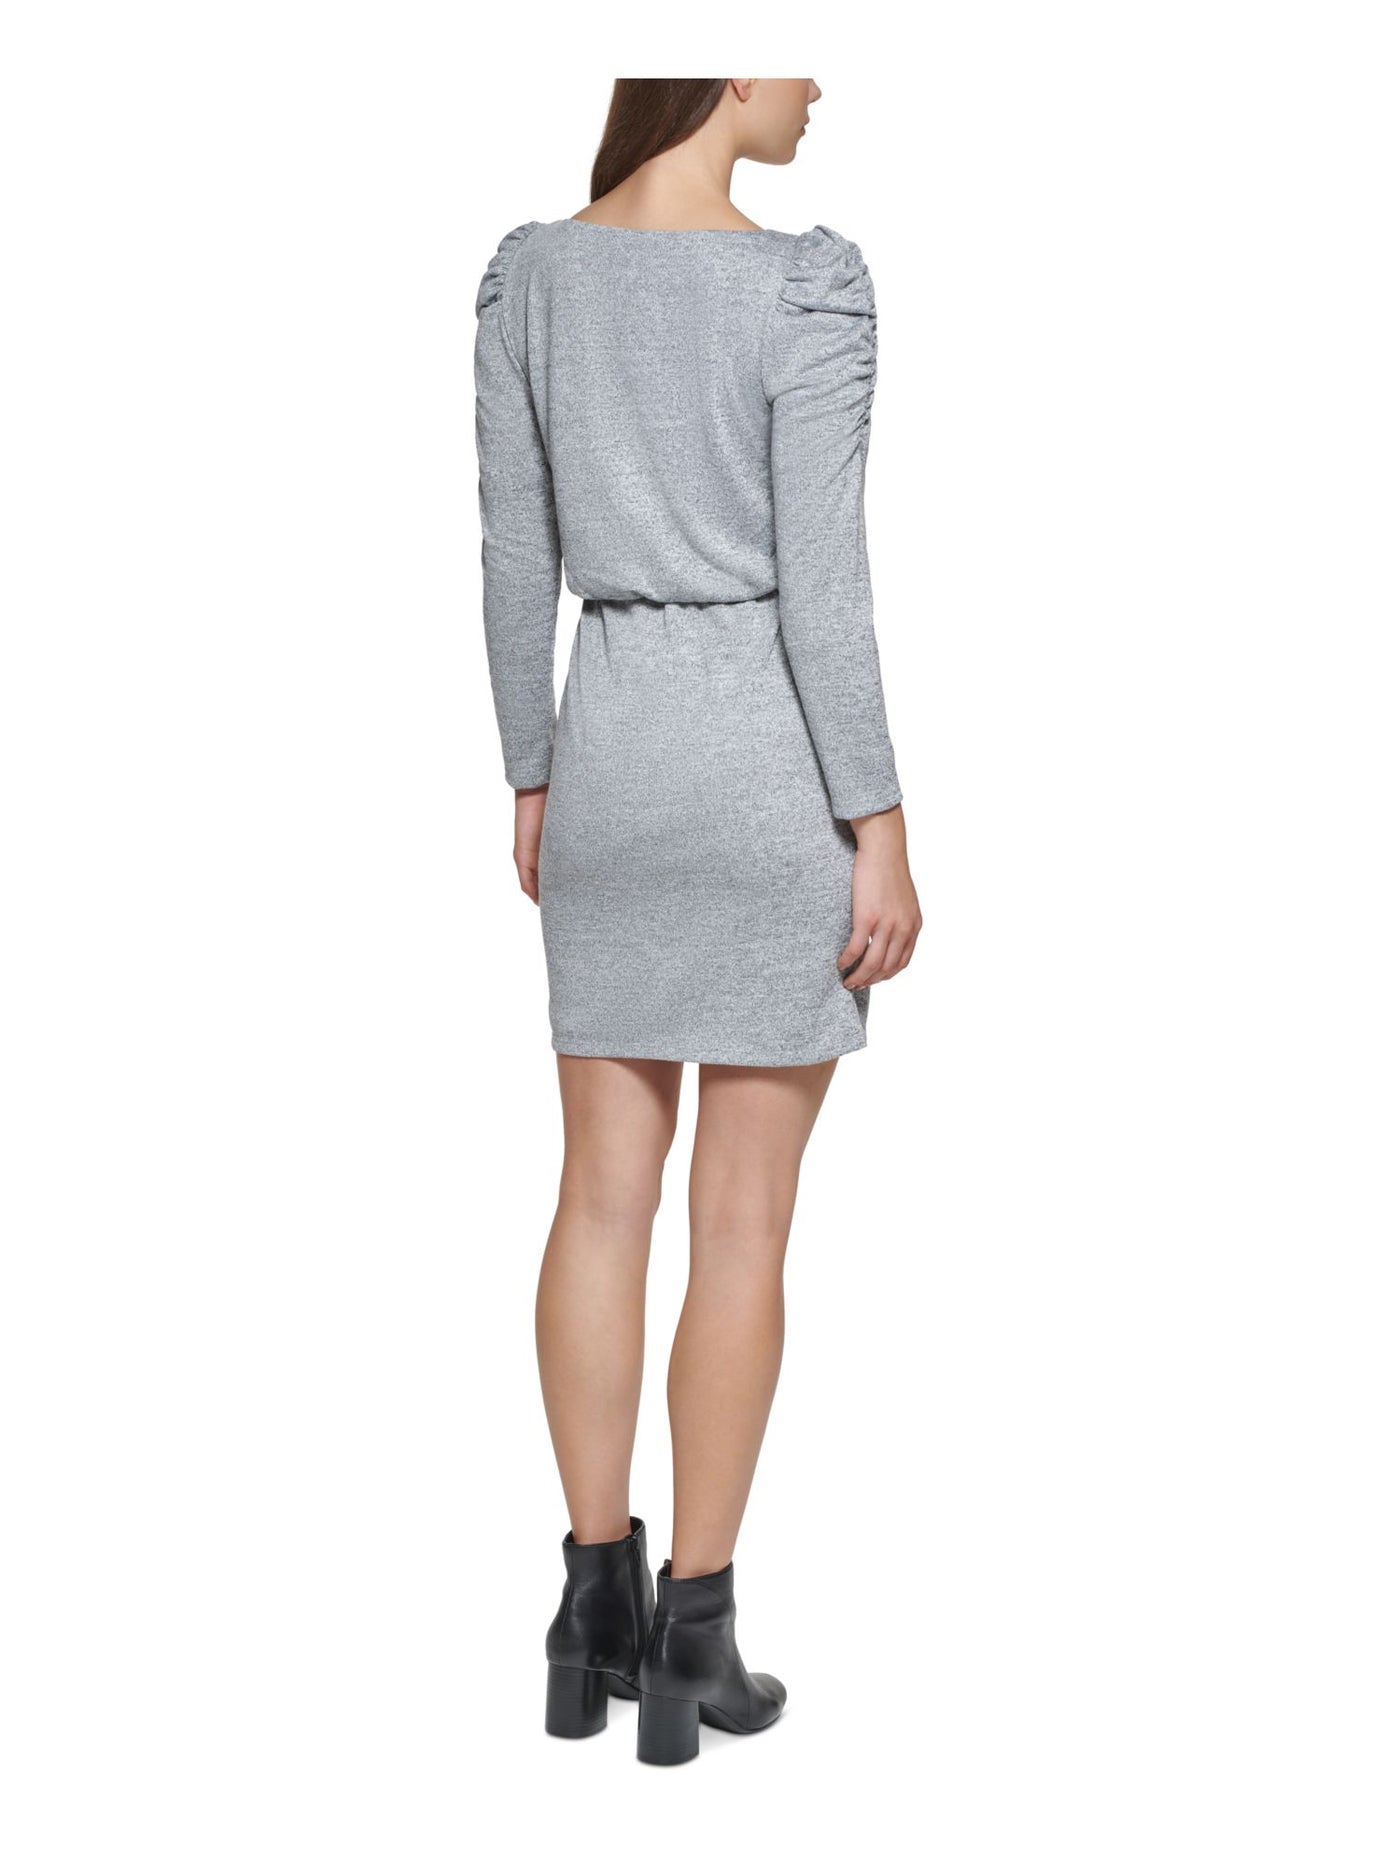 JESSICA HOWARD Womens Gray Metallic Ruched Lined Long Sleeve Jewel Neck Above The Knee Wear To Work Blouson Dress 16